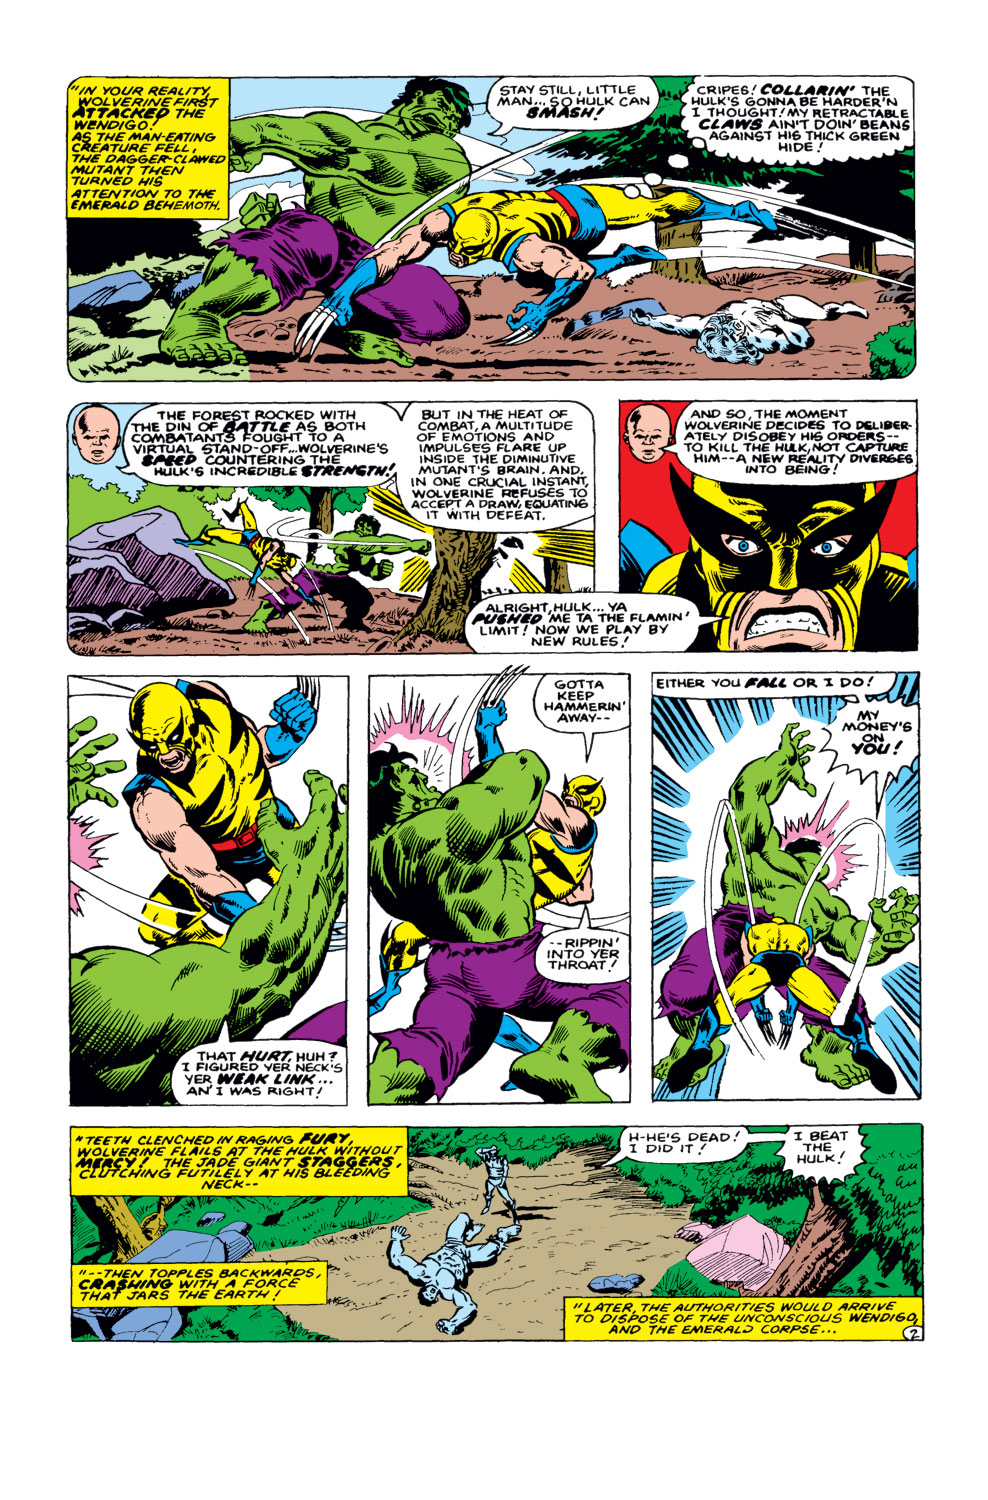 What If? (1977) issue 31 - Wolverine had killed the Hulk - Page 3